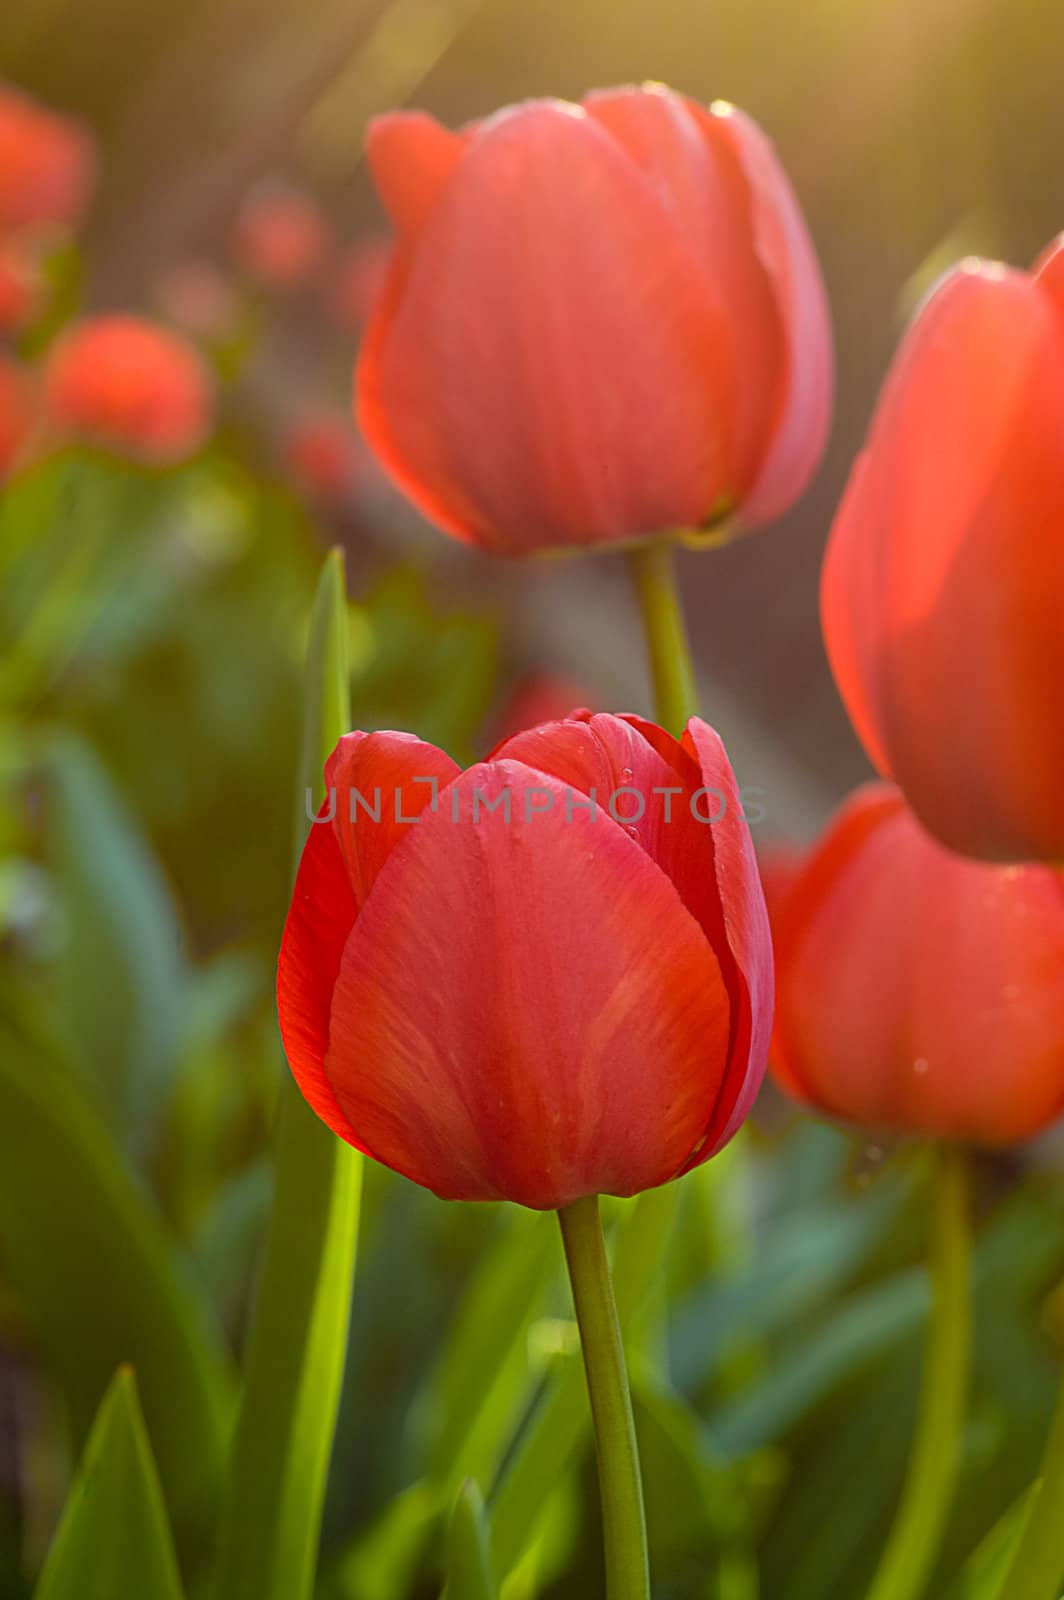 Sunlit red tulips by Angel_a